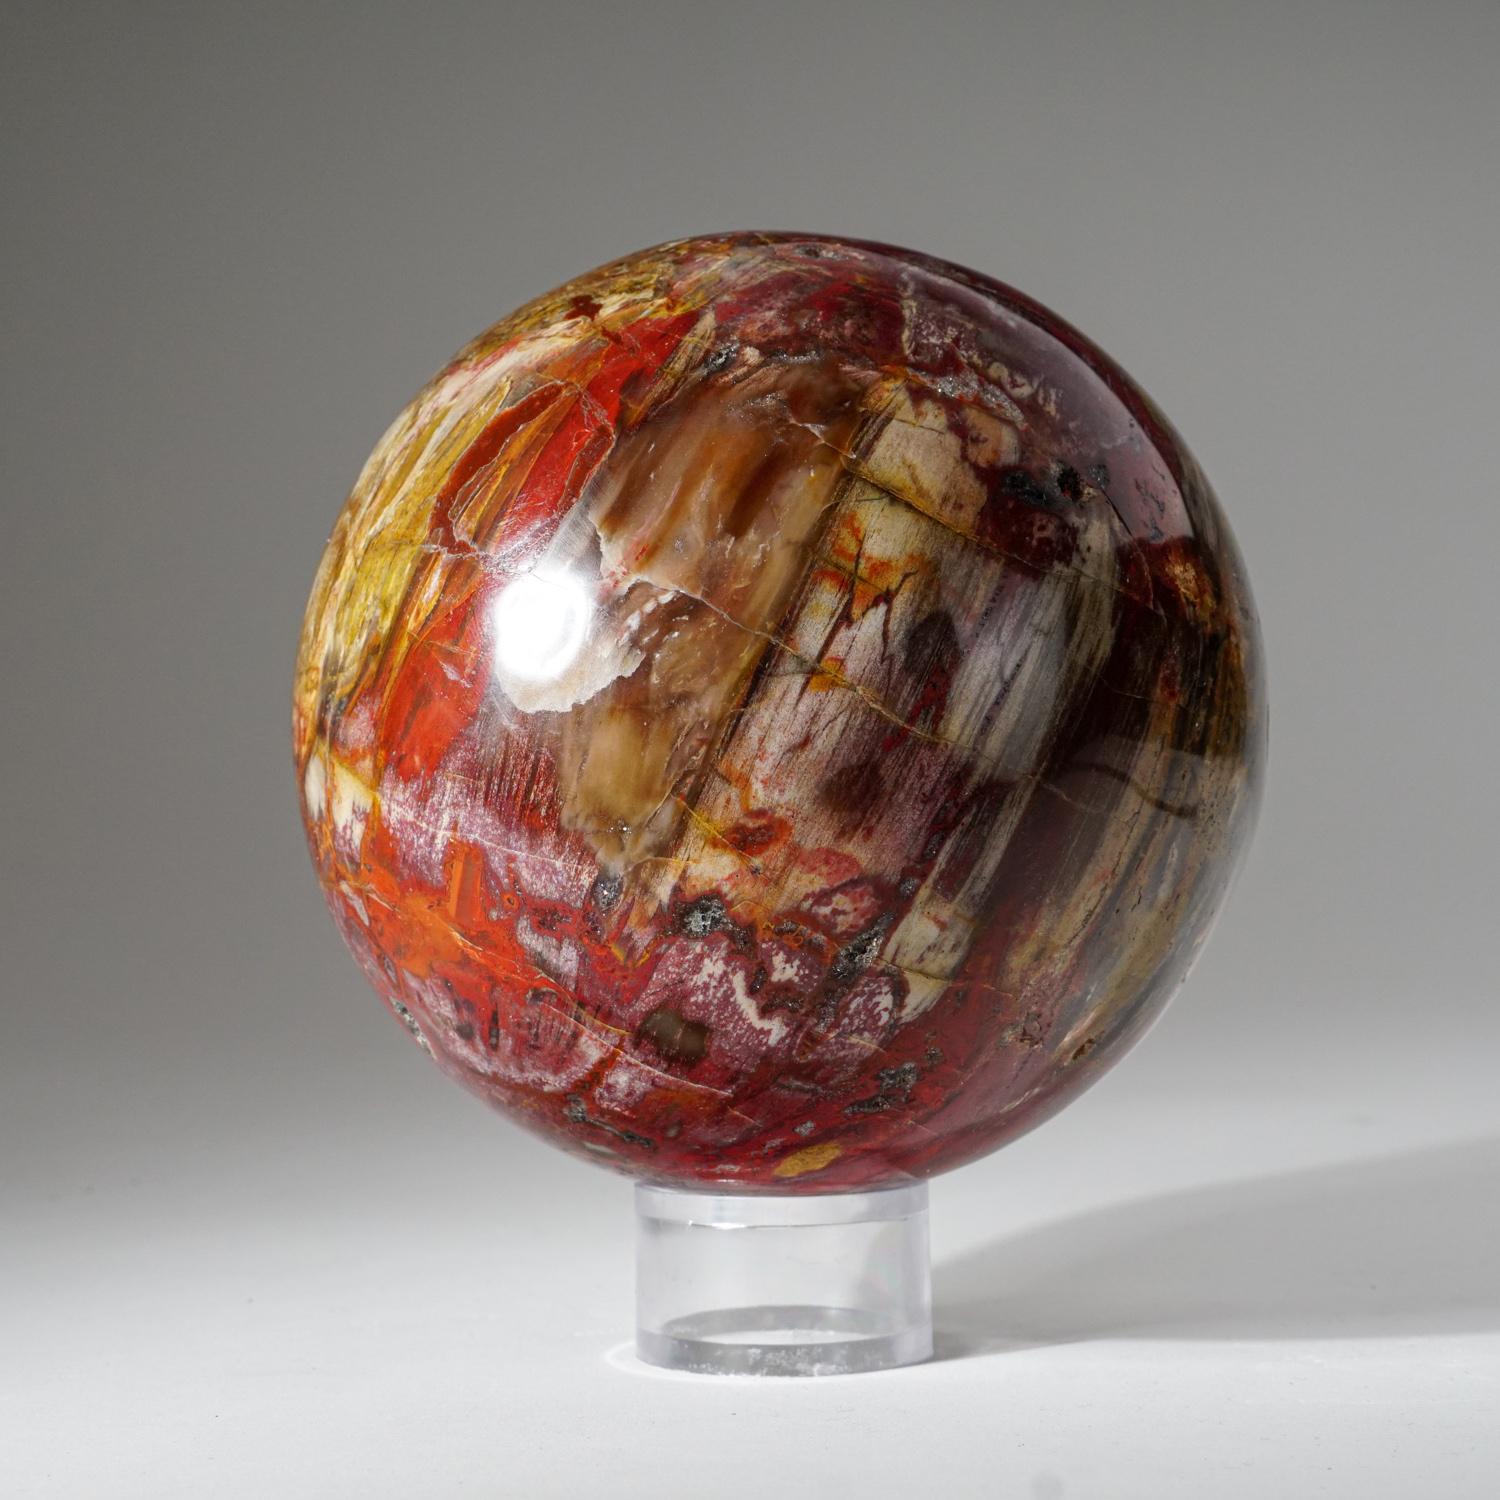 Beautiful hand polished petrified wood sphere from Madagascar. It has an amazing pattern with vibrant hues of brown, yellow, and orange. 

Fossilized Petrified Wood, which is also known as Agatized Wood, forms when a tree has died and silicon